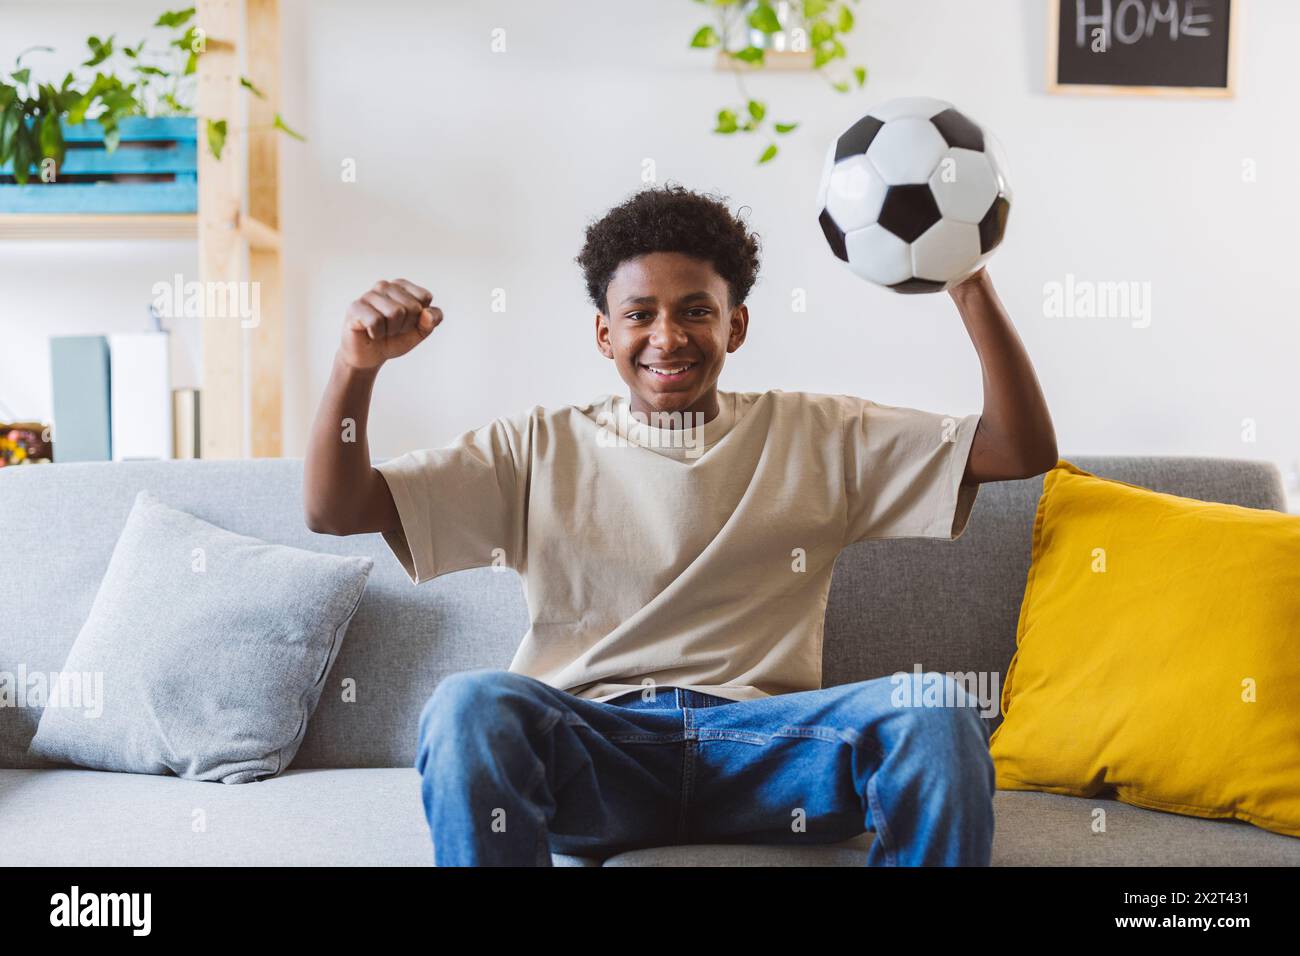 Cheerful boy holding soccer ball watching match at home Stock Photo